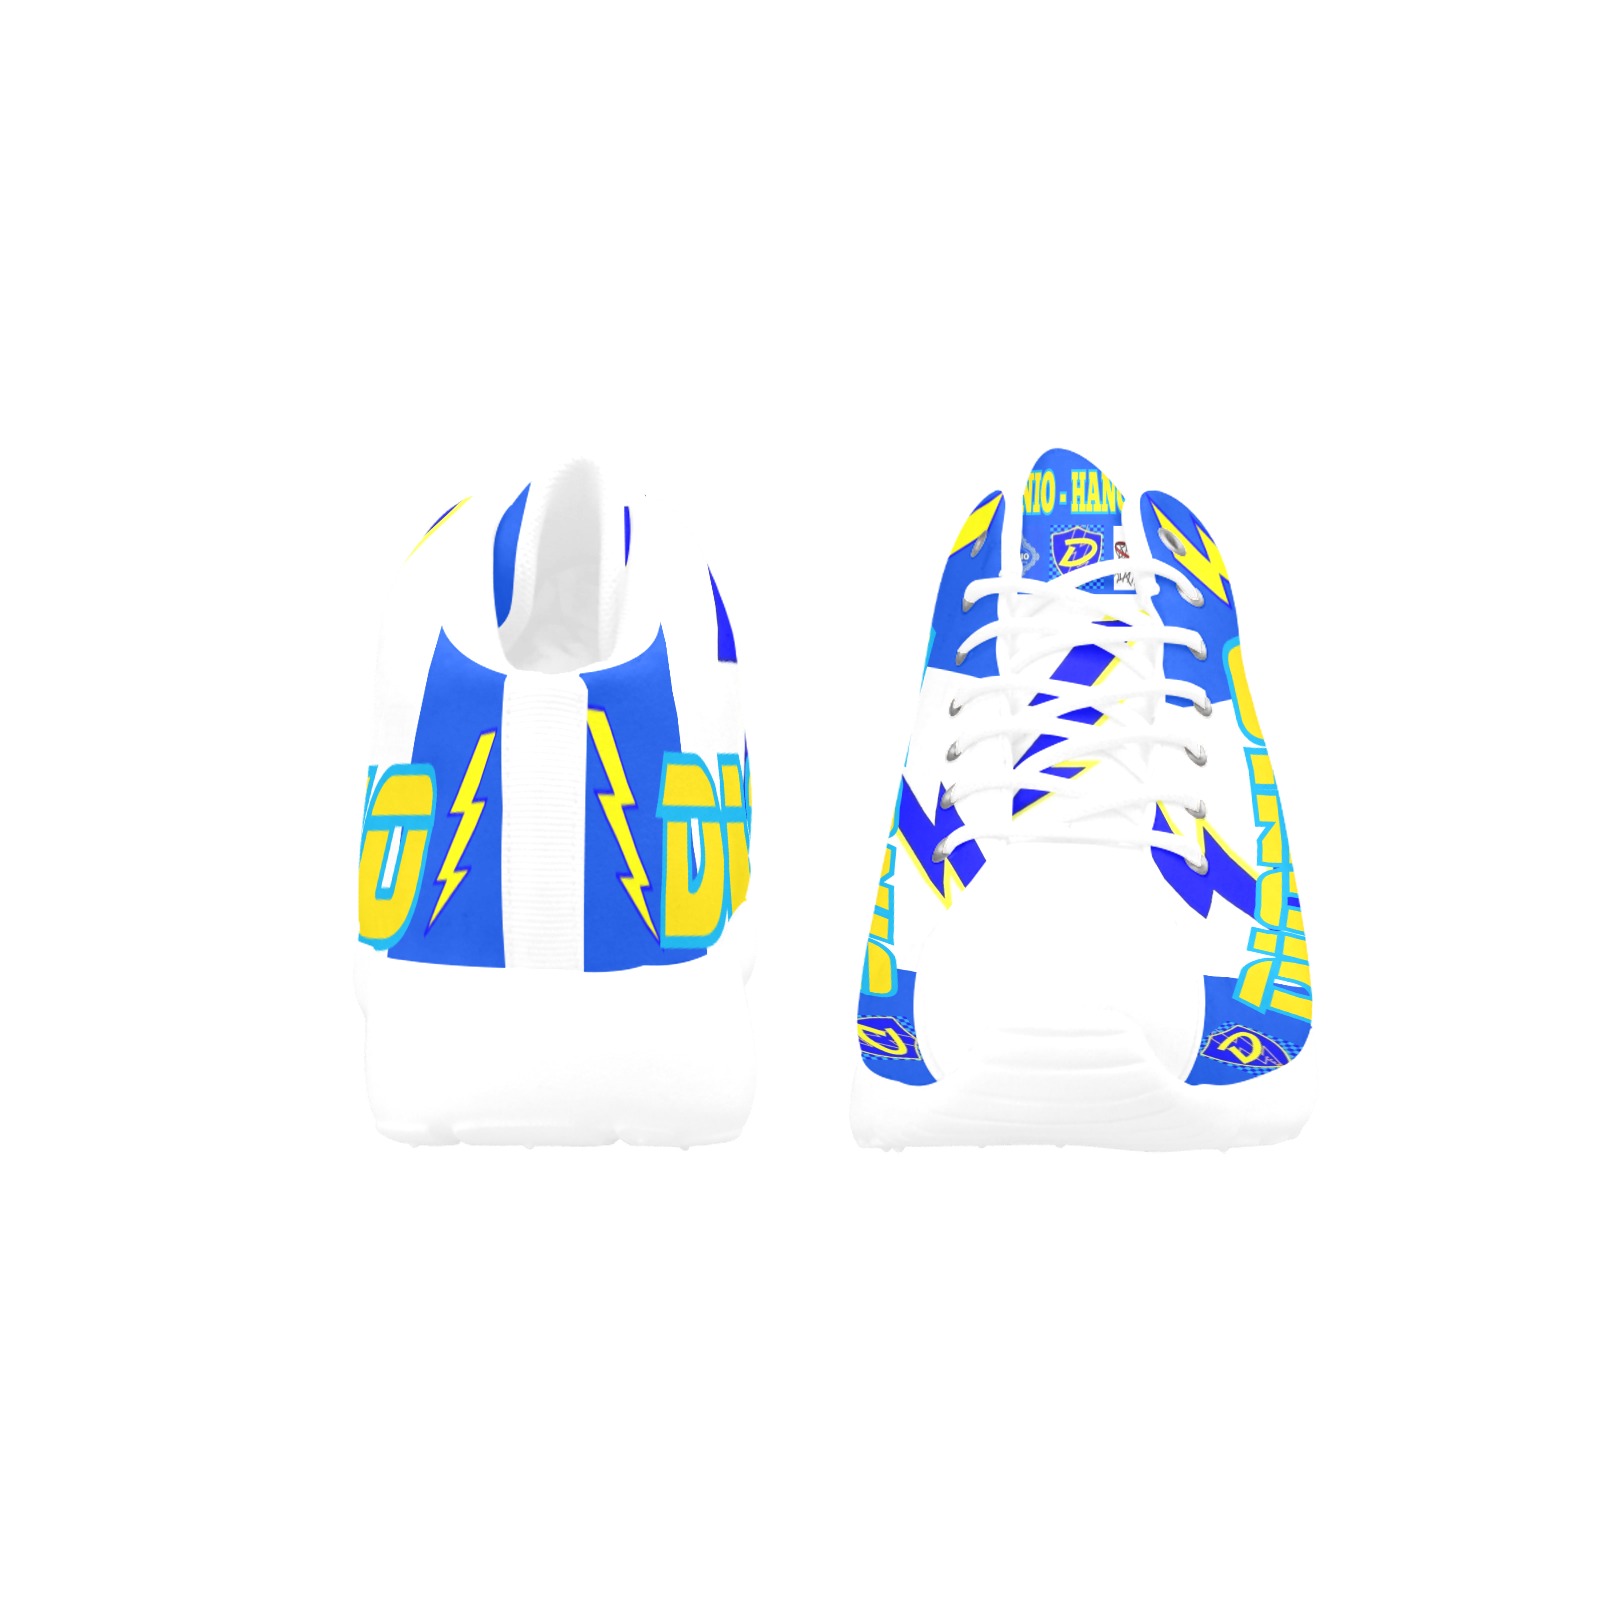 DIONIO - HANG OUT Basketball Sneakers(Blue ,Yellow & White) Men's Basketball Training Shoes (Model 47502)